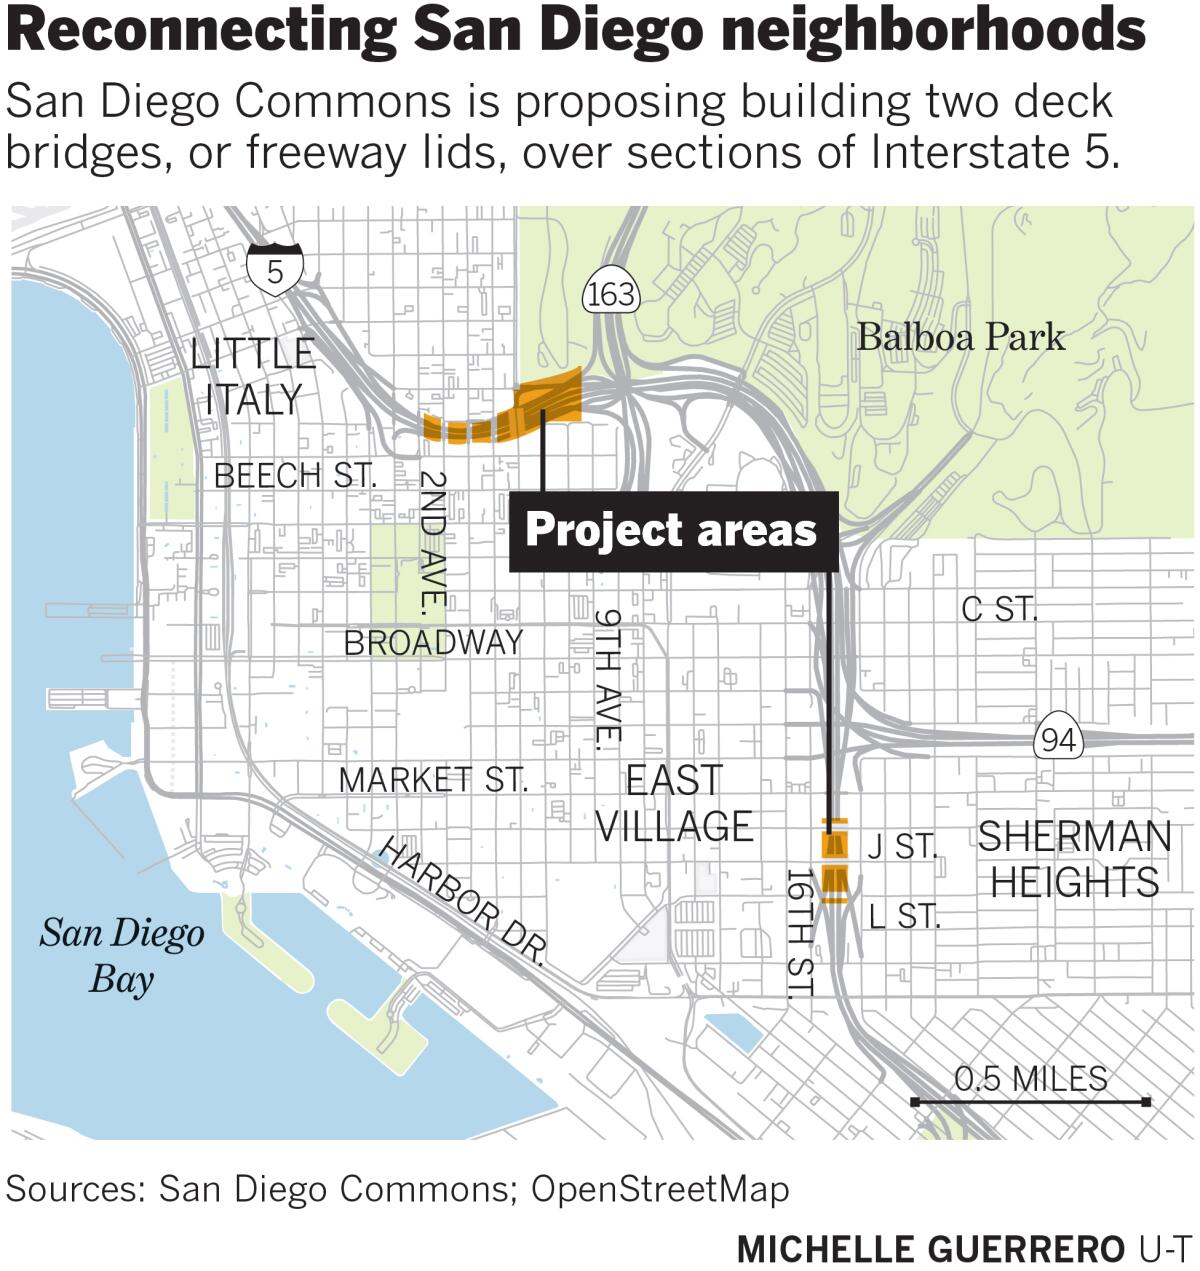 Map showing project areas for reconnecting San Diego neighborhoods with bridges over sections of Interstate 5